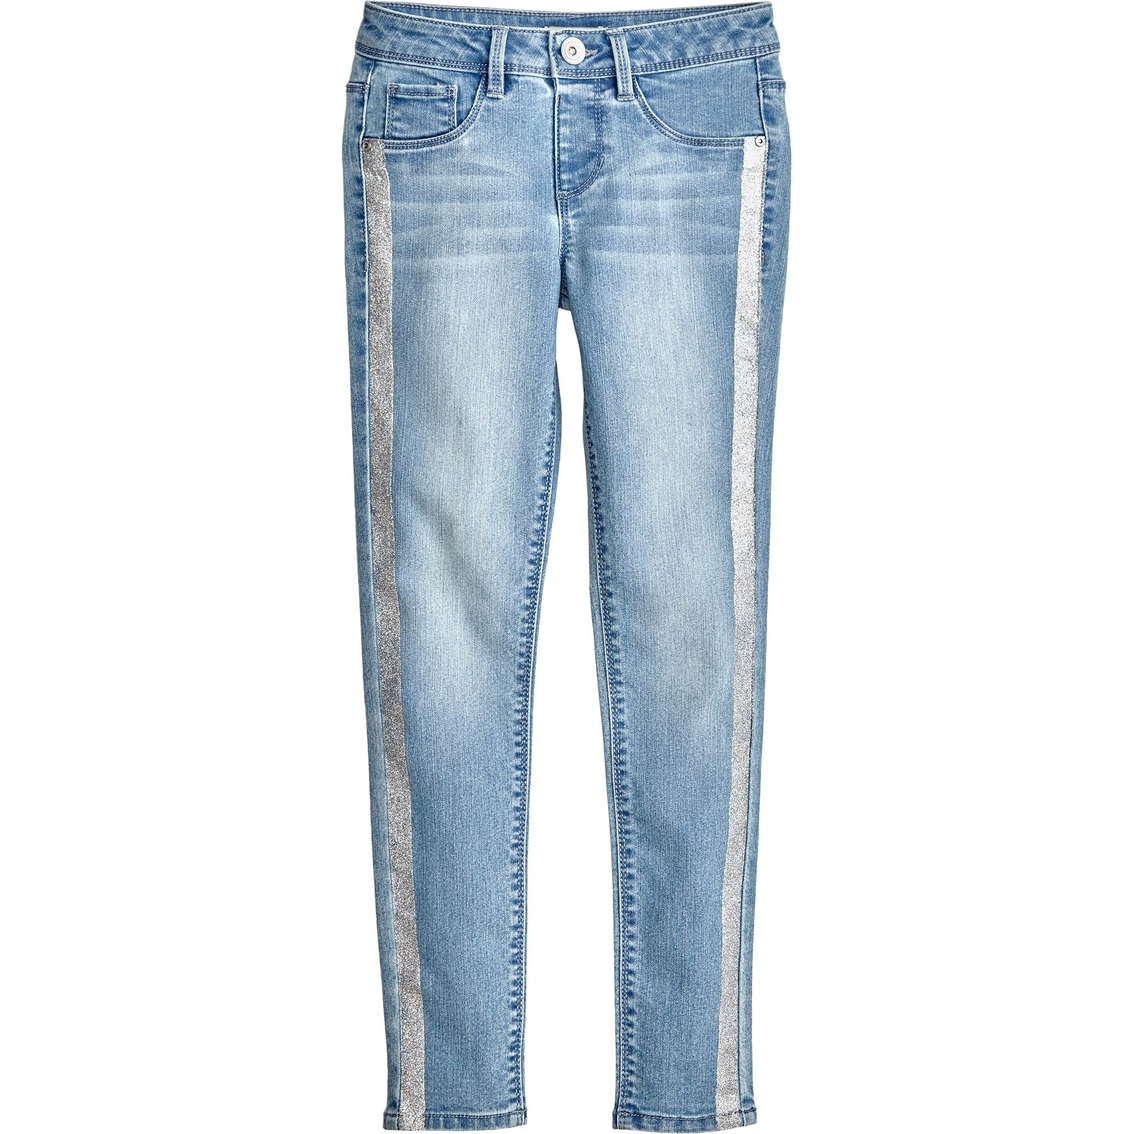 jeans with silver stripe